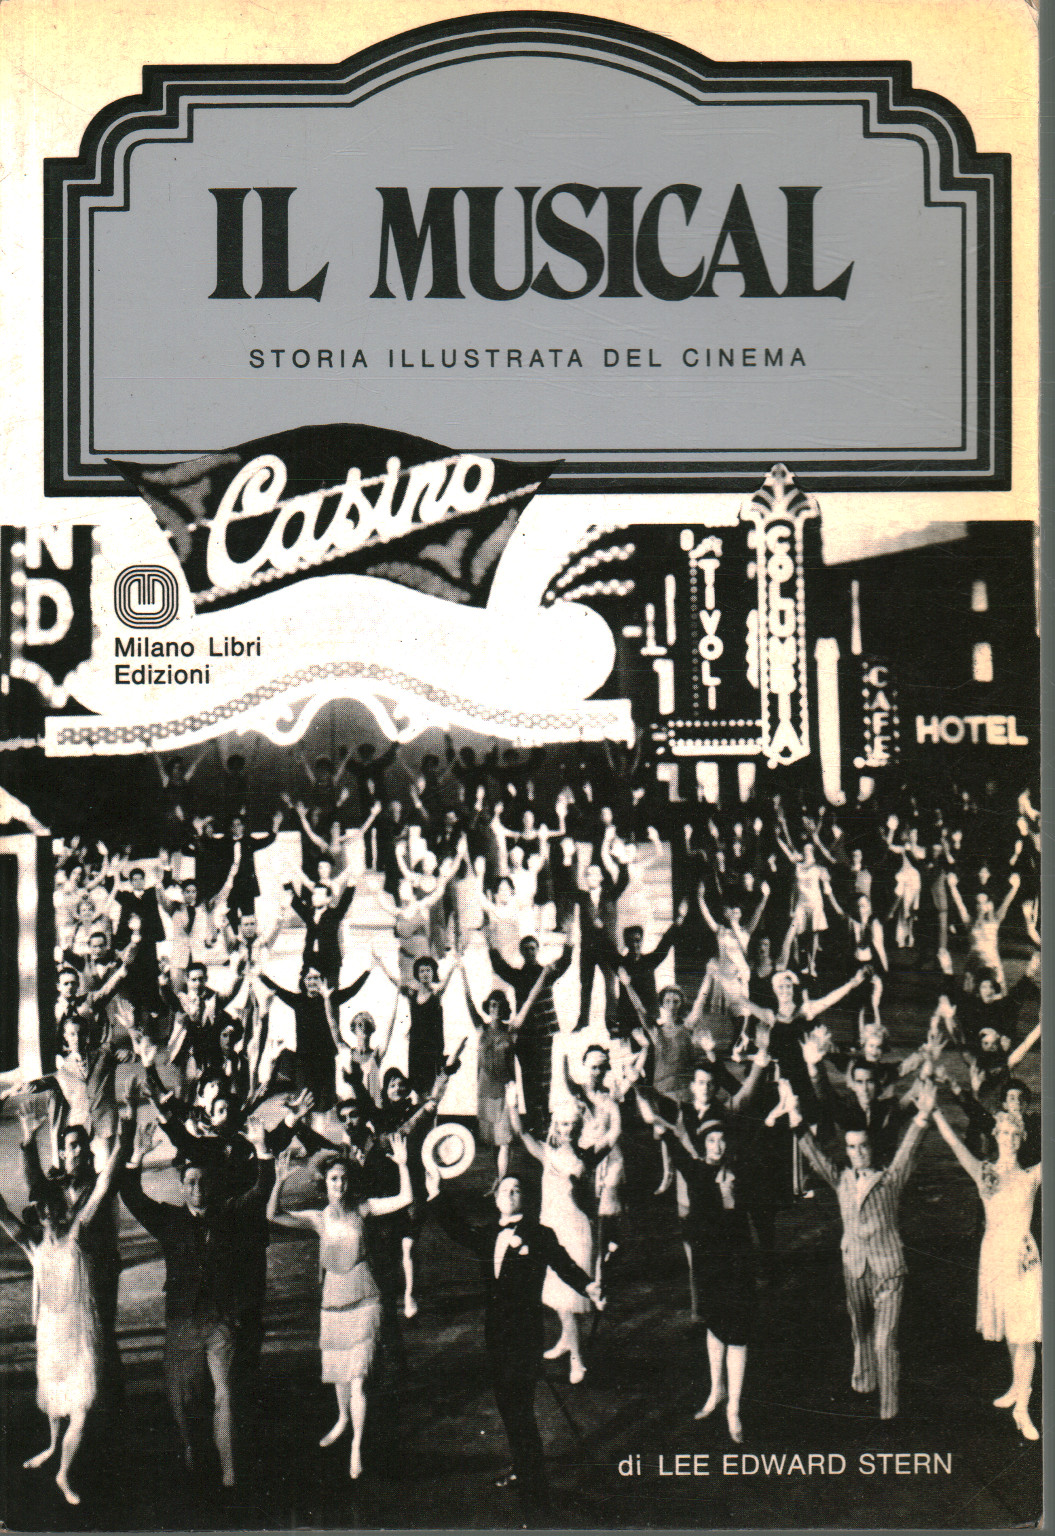 The Musical, s.a.